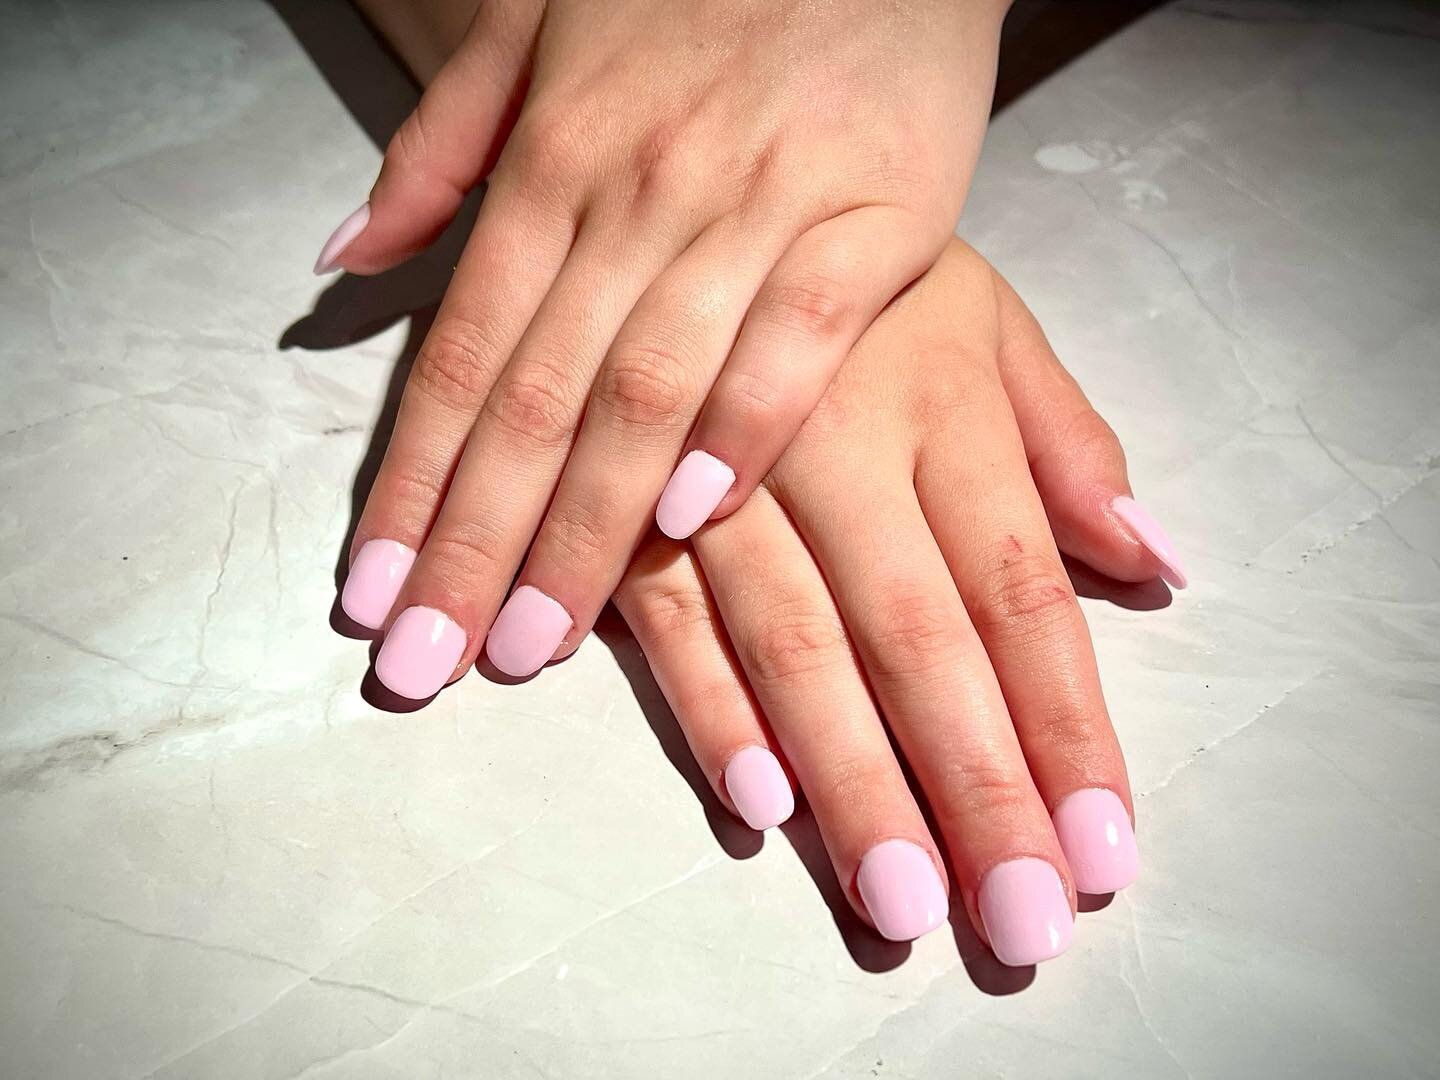 Small Nails Before and After Dip. Text: 6104462128 to schedule an appointment #havertown #havertownlife #mainline #delawarecountypa #delco #delawarecounty #philly #poshmanipedi #naturalnails #gel #dip #lashes #hardwax #reflexology